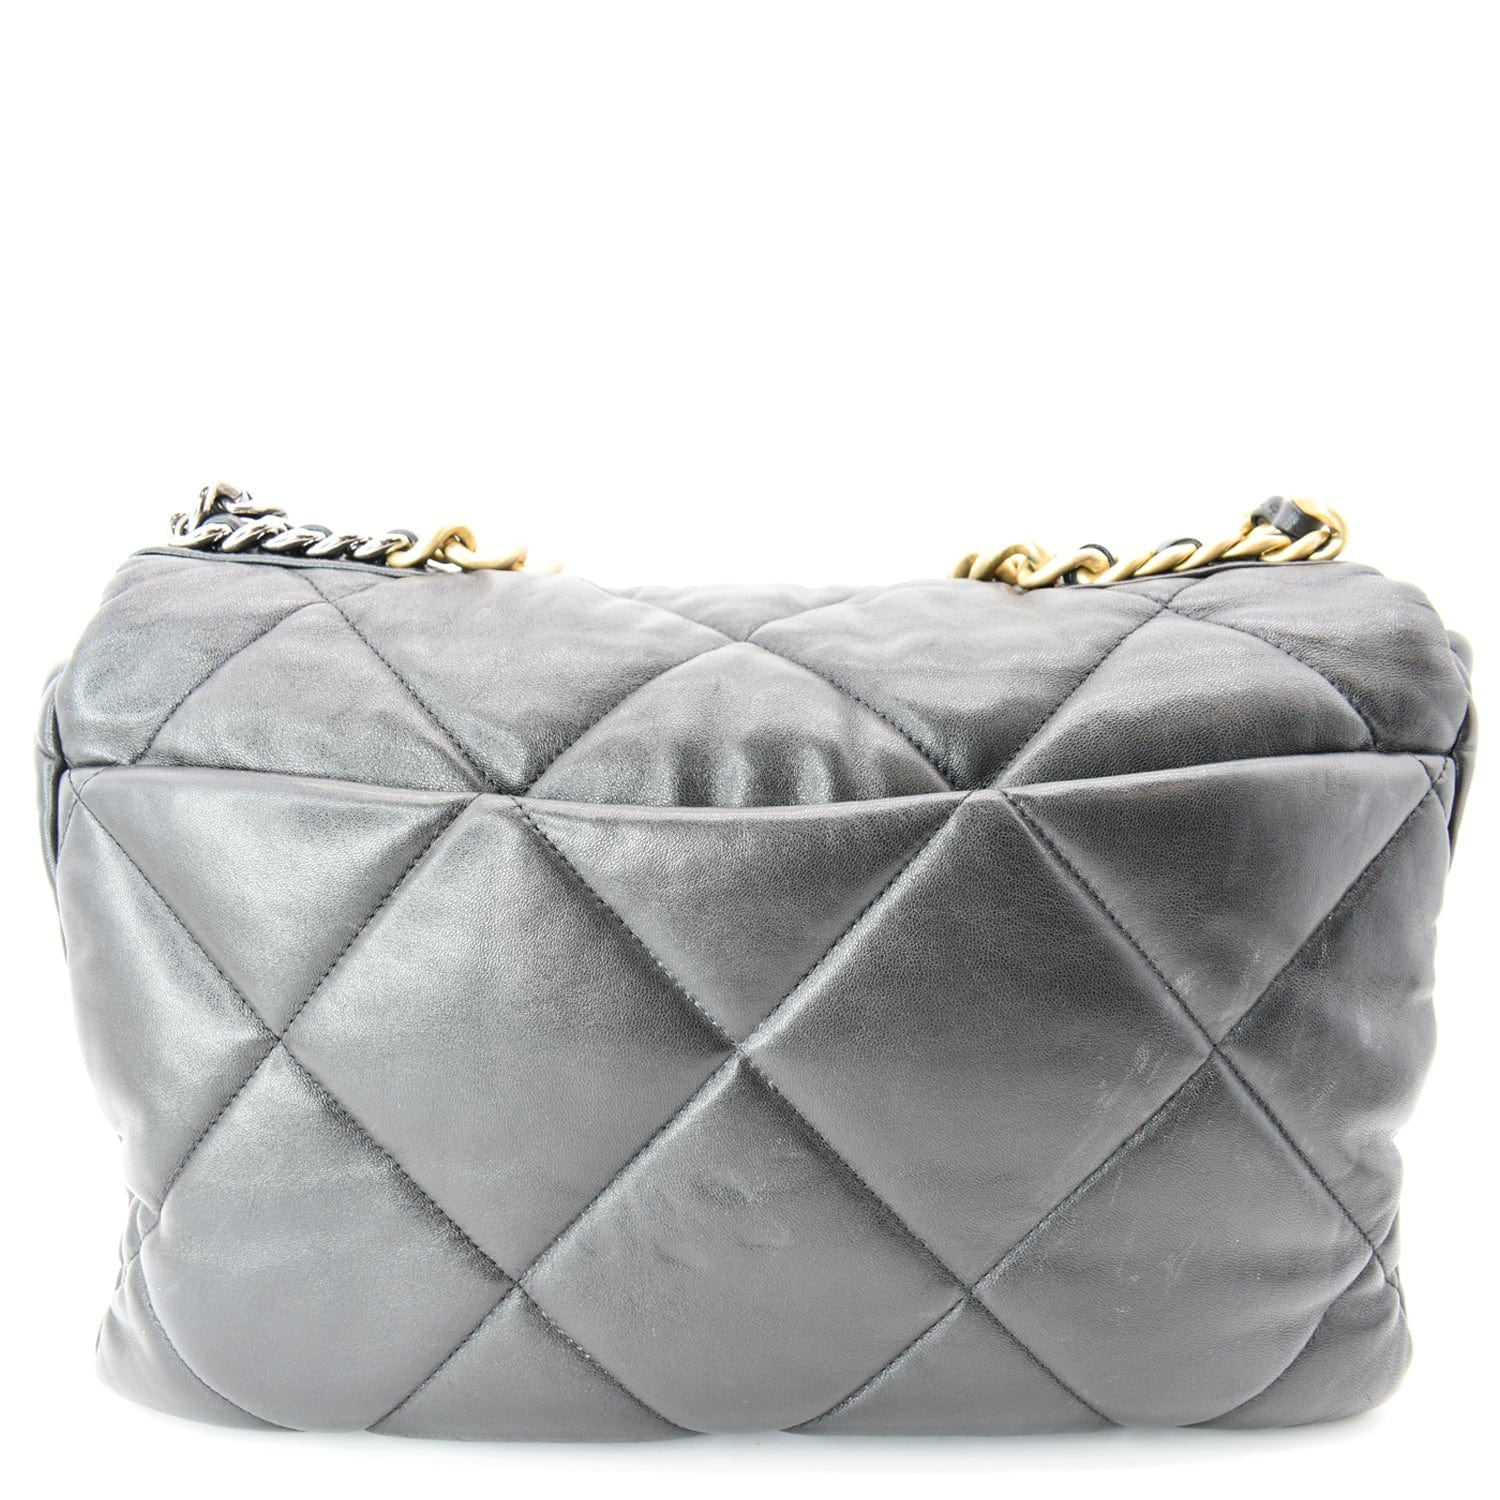 Chanel Off White Quilted Leather Large 19 Flap Bag Chanel